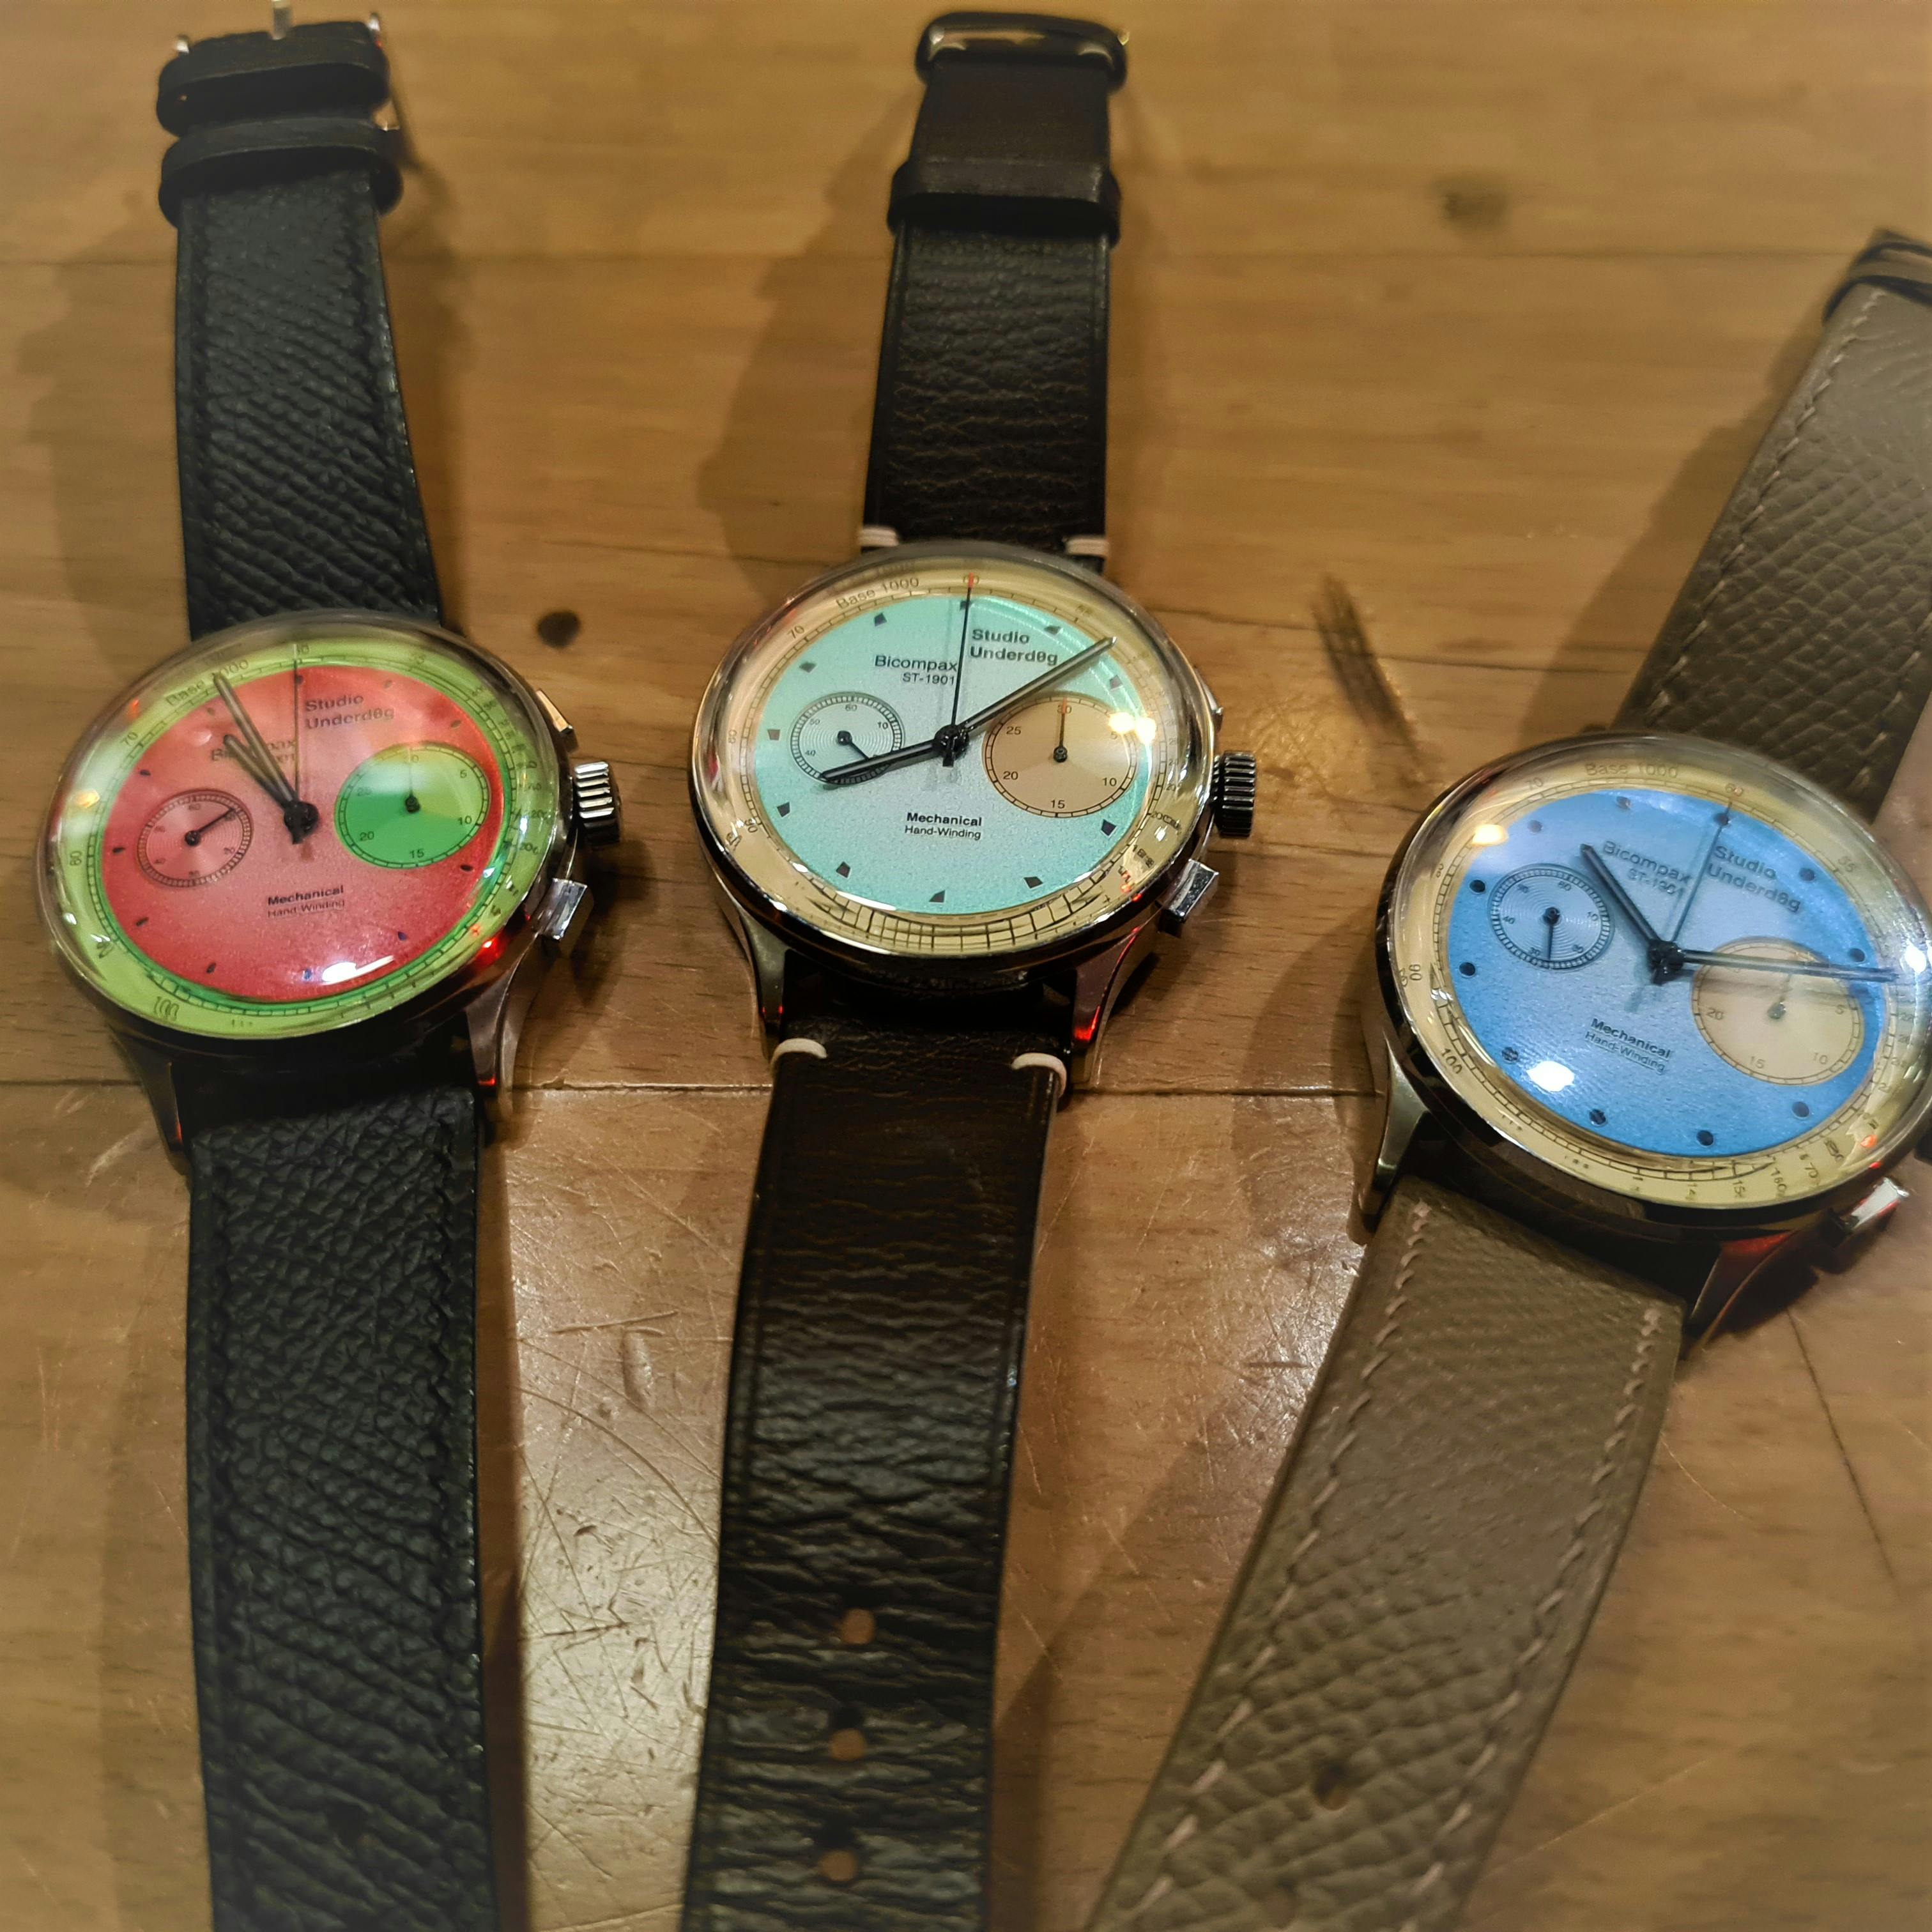 As summer-y as these Studio Underd0g watches look, their leather straps will not survive much water or sweat 